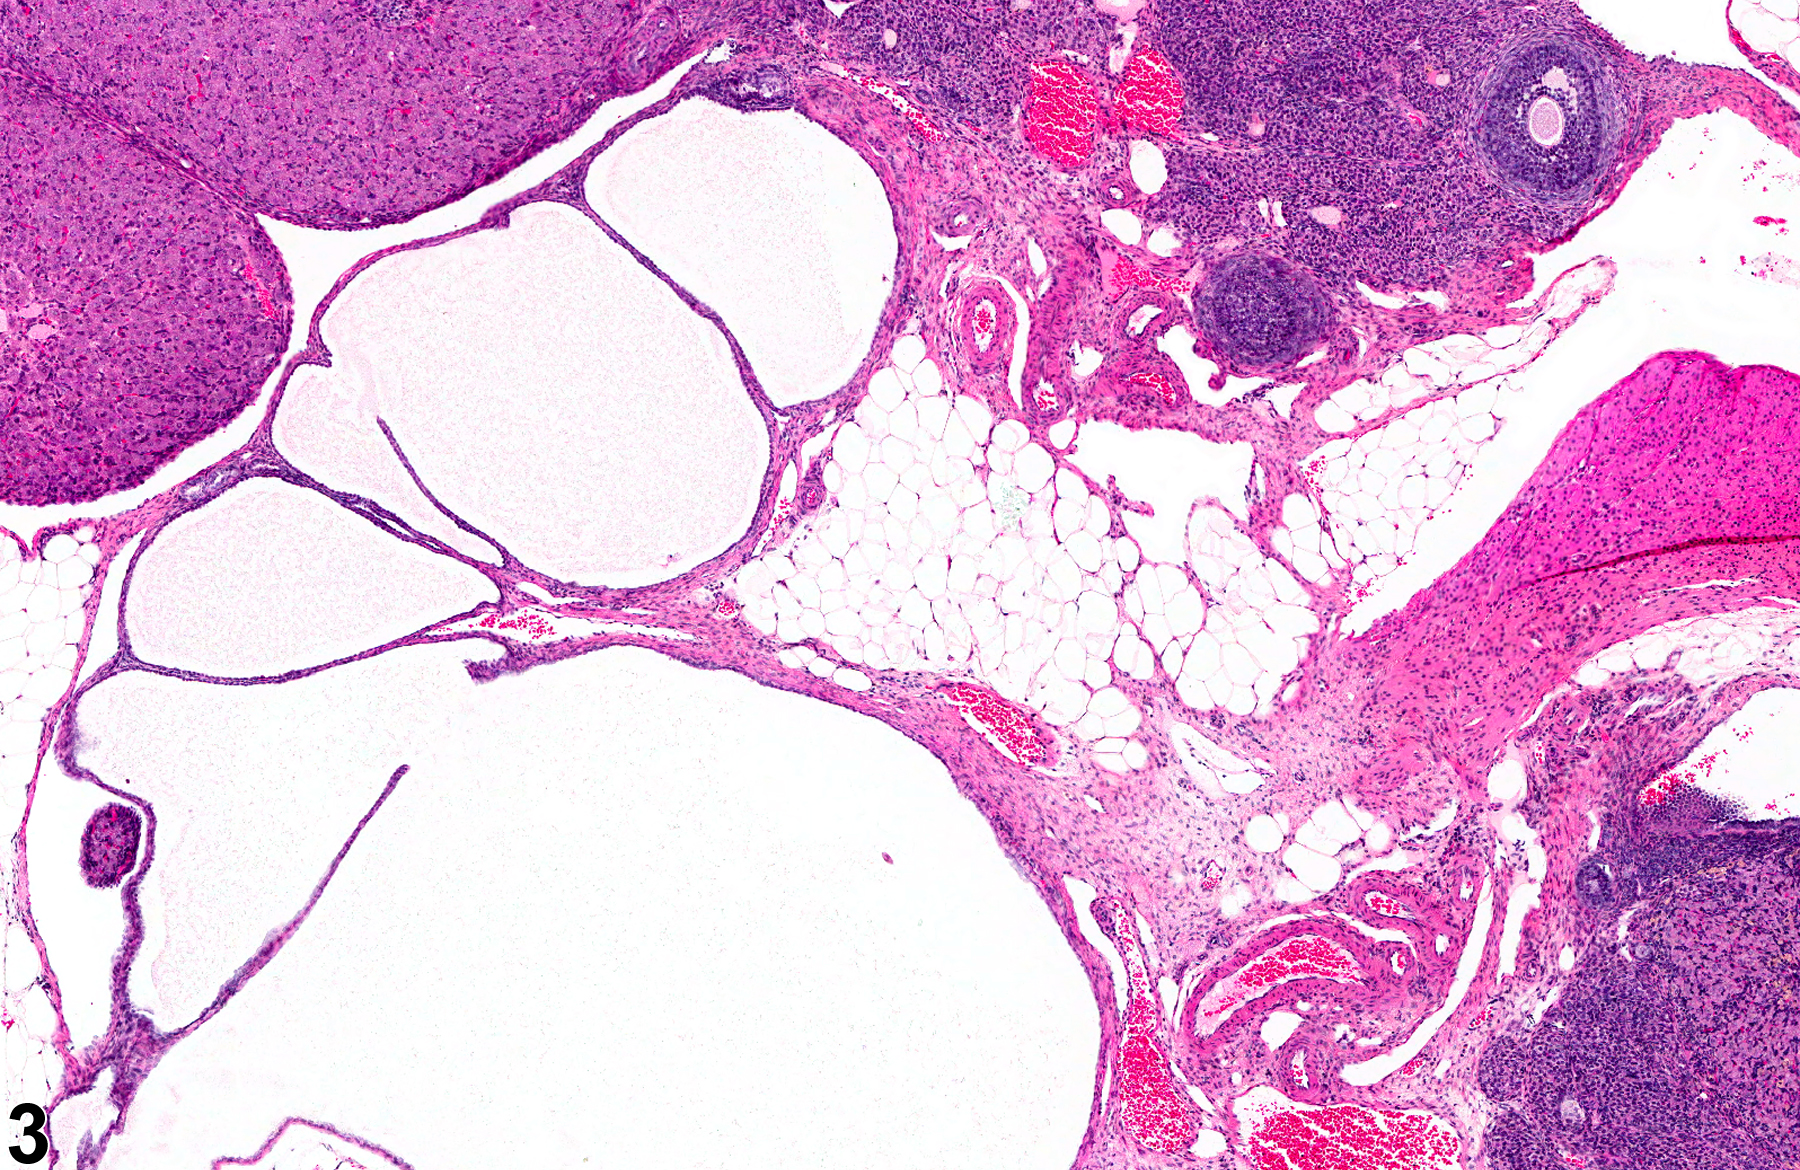 Image of cyst (paraovarian tissue) in the ovary from a female B6C3F1 mouse in a subchronic study